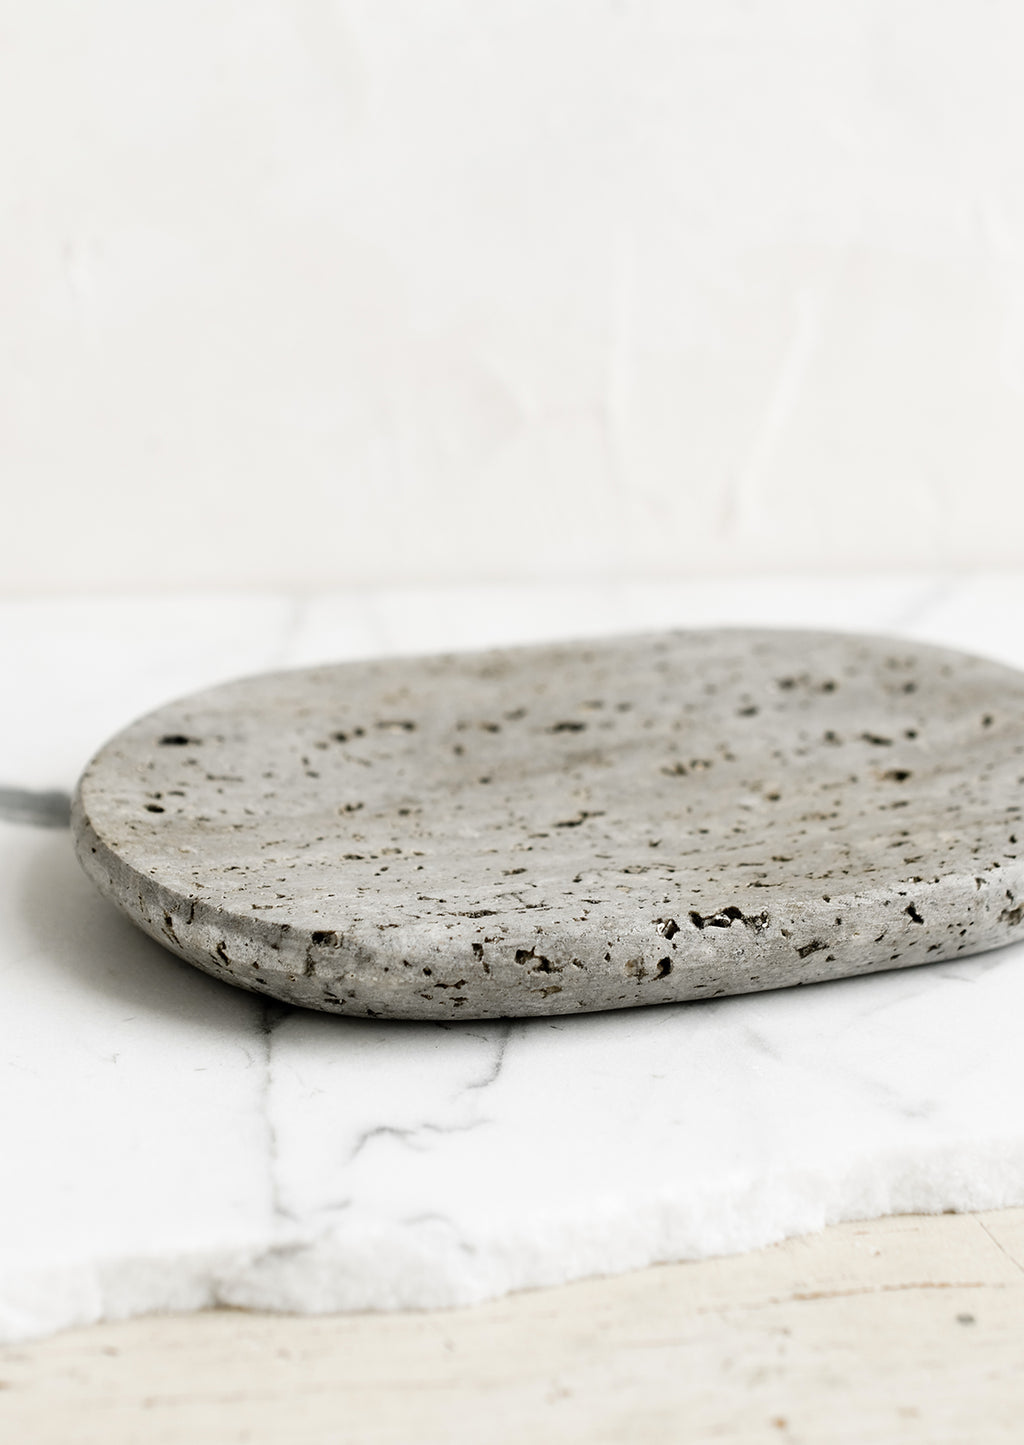 2: An oval-shaped soap dish in grey travertine.